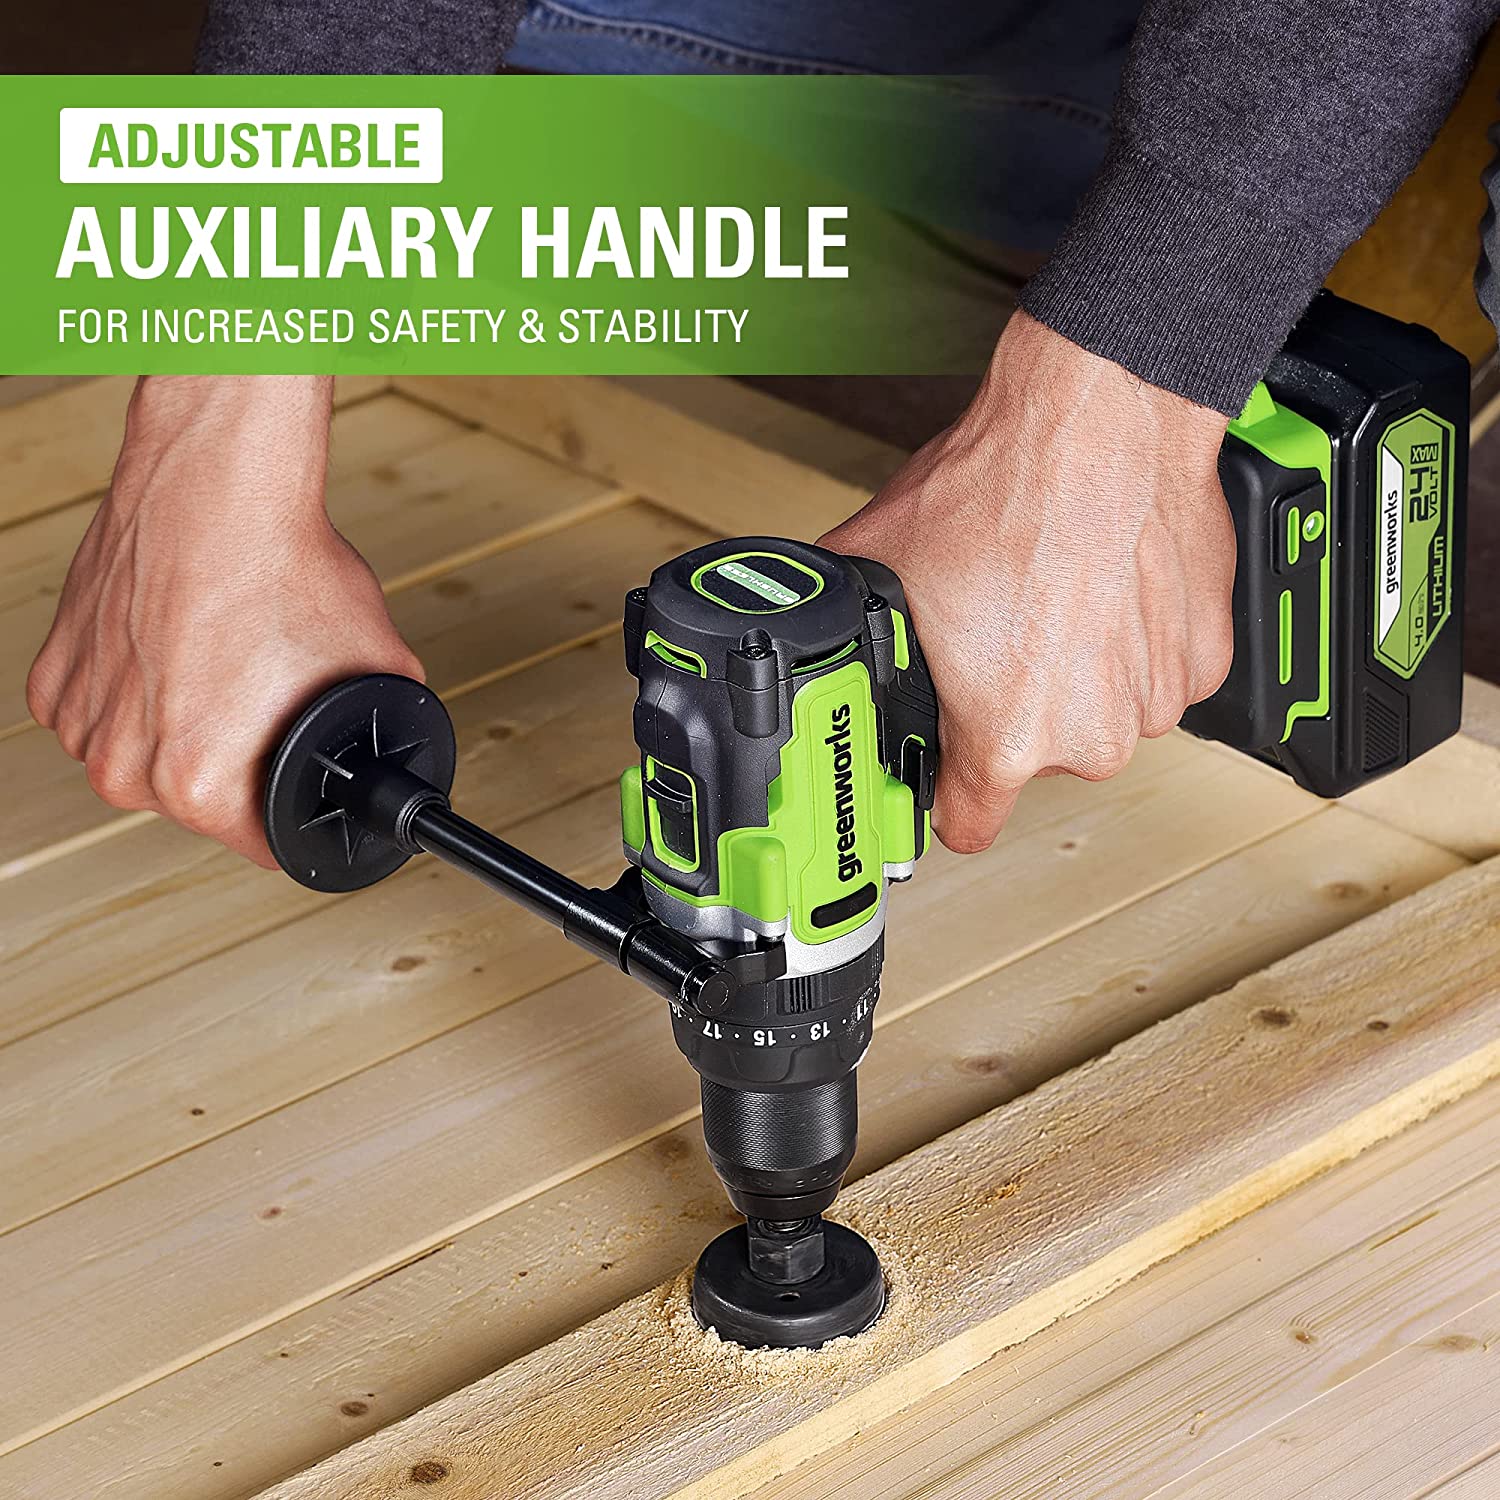 Greenworks 24V Max Cordless Brushless Drill + Impact Combo Kit, (2) 2.0Ah Batteries, Fast Charger, and Bag Included